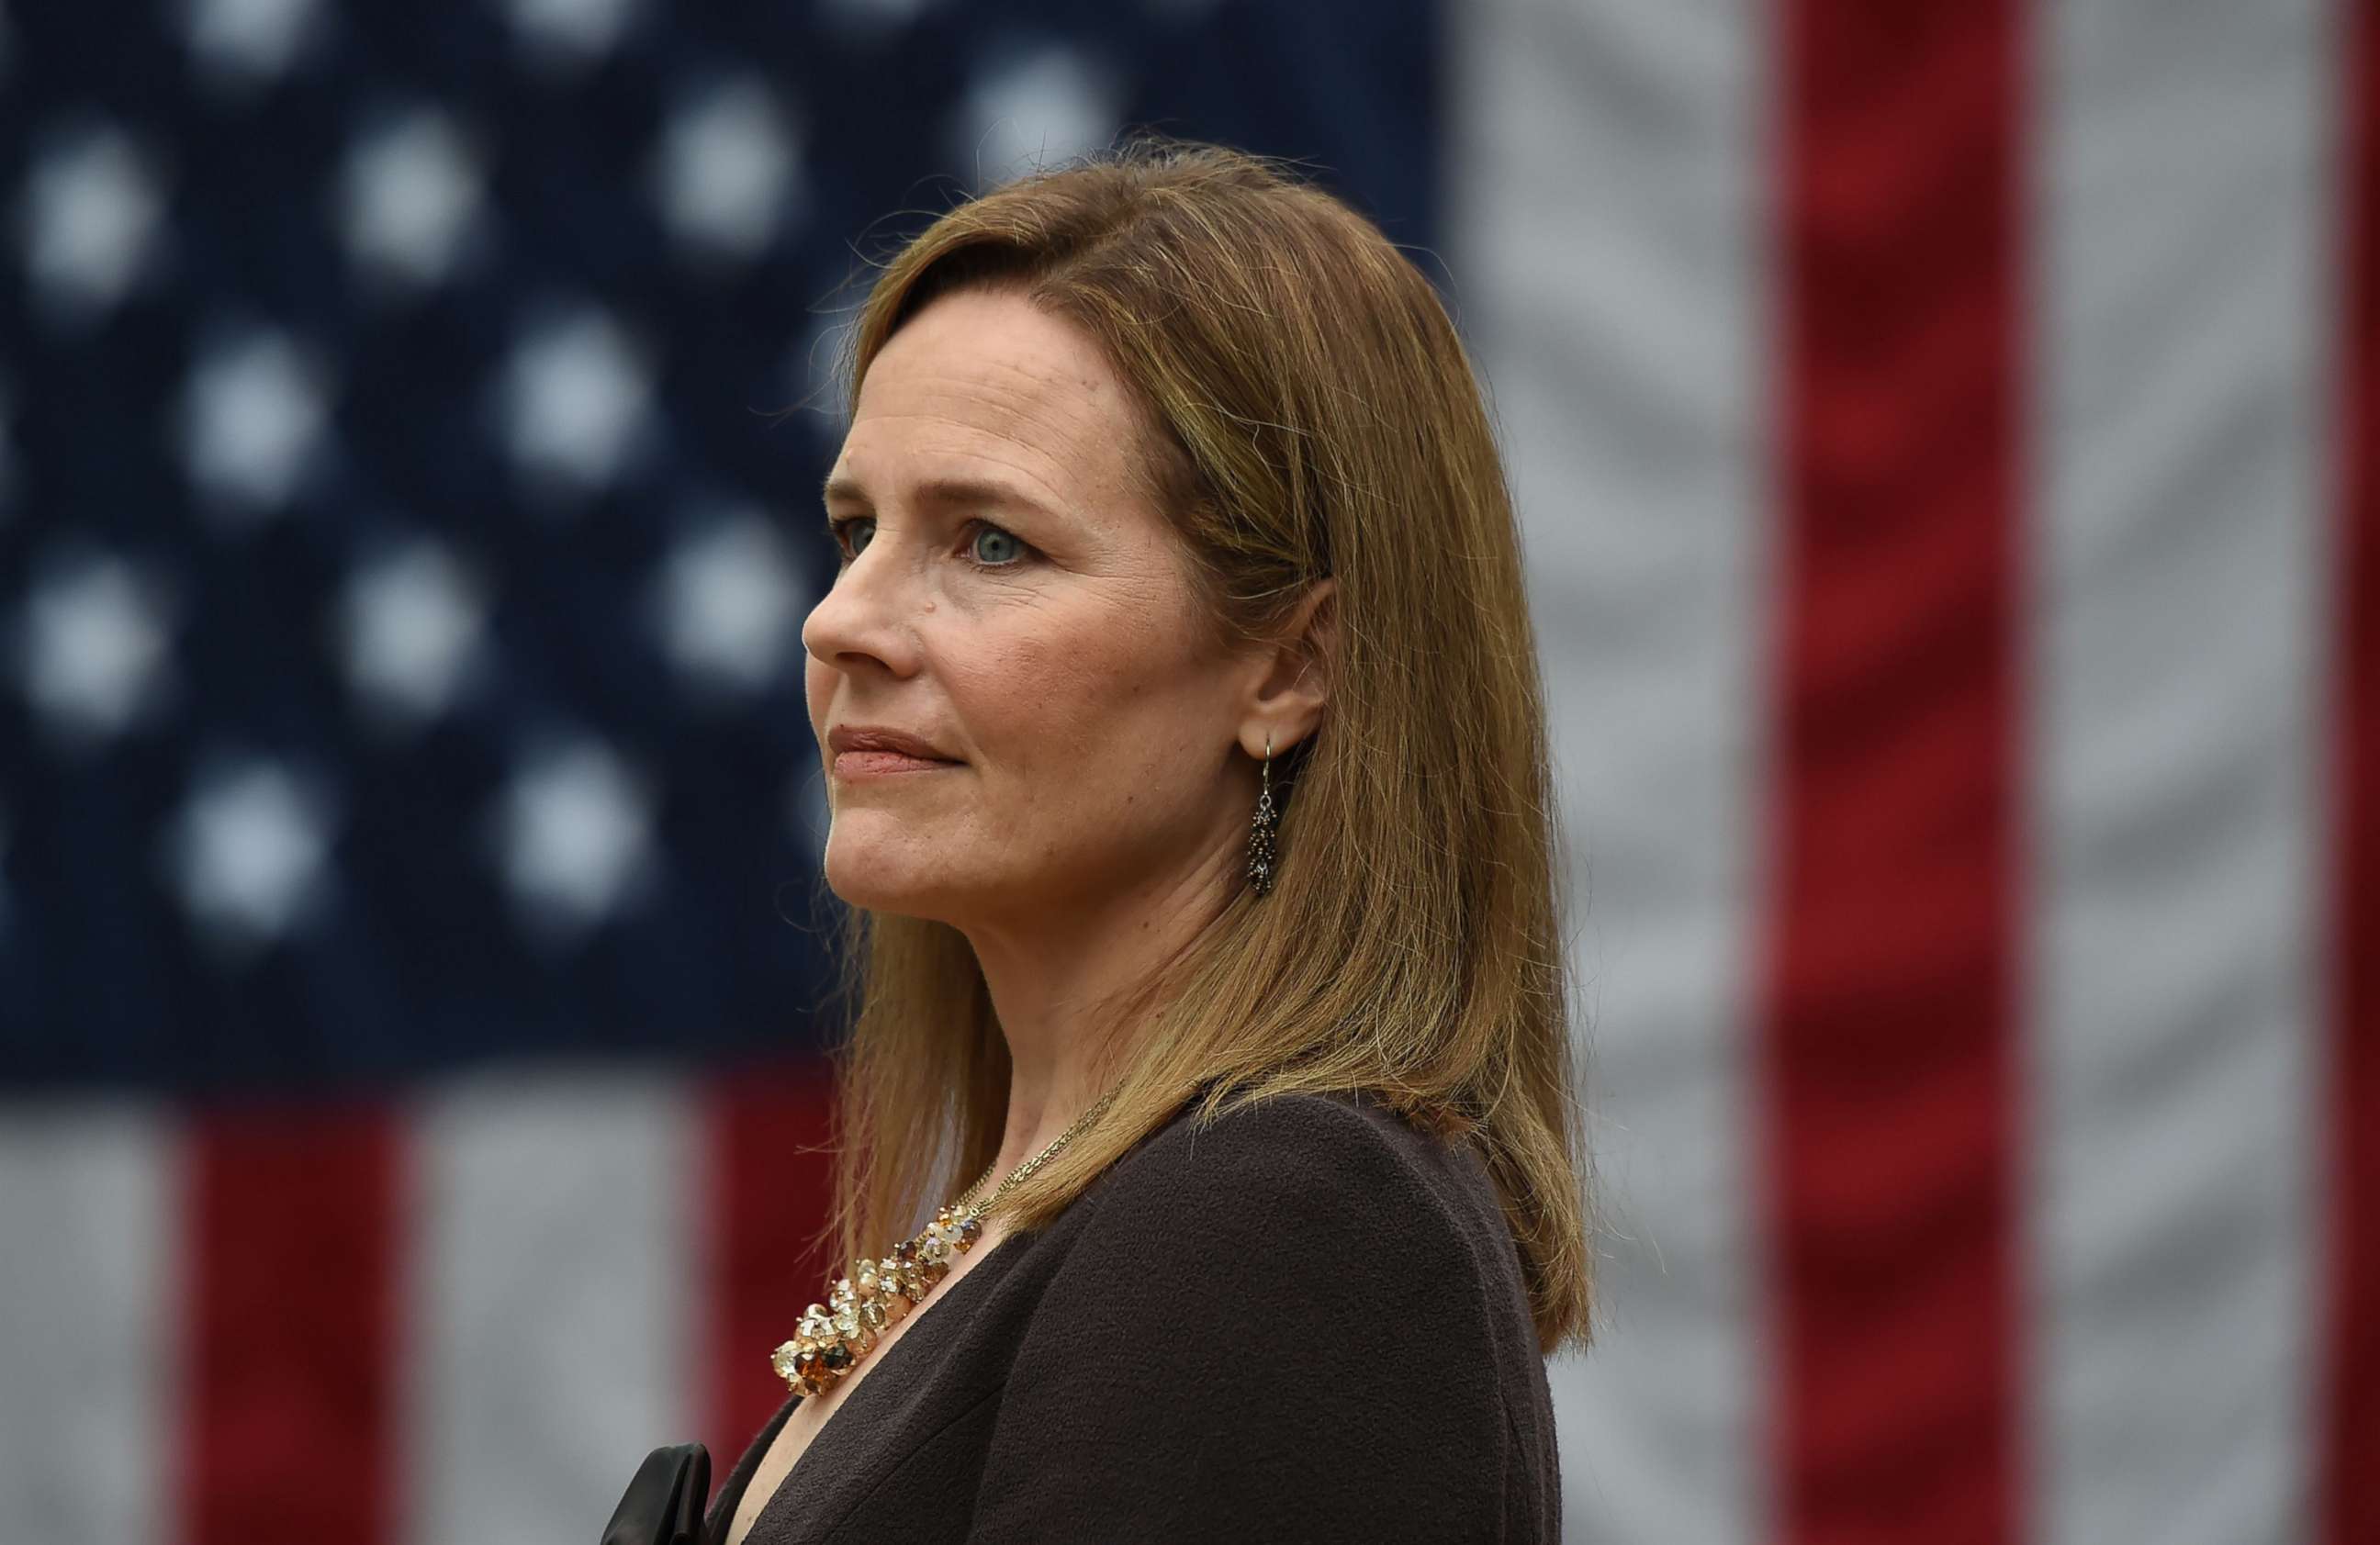 PHOTO: Judge Amy Coney Barrett is nominated to the US Supreme Court by President Donald Trump in the Rose Garden of the White House in Washington, DC, on Sept. 26, 2020.